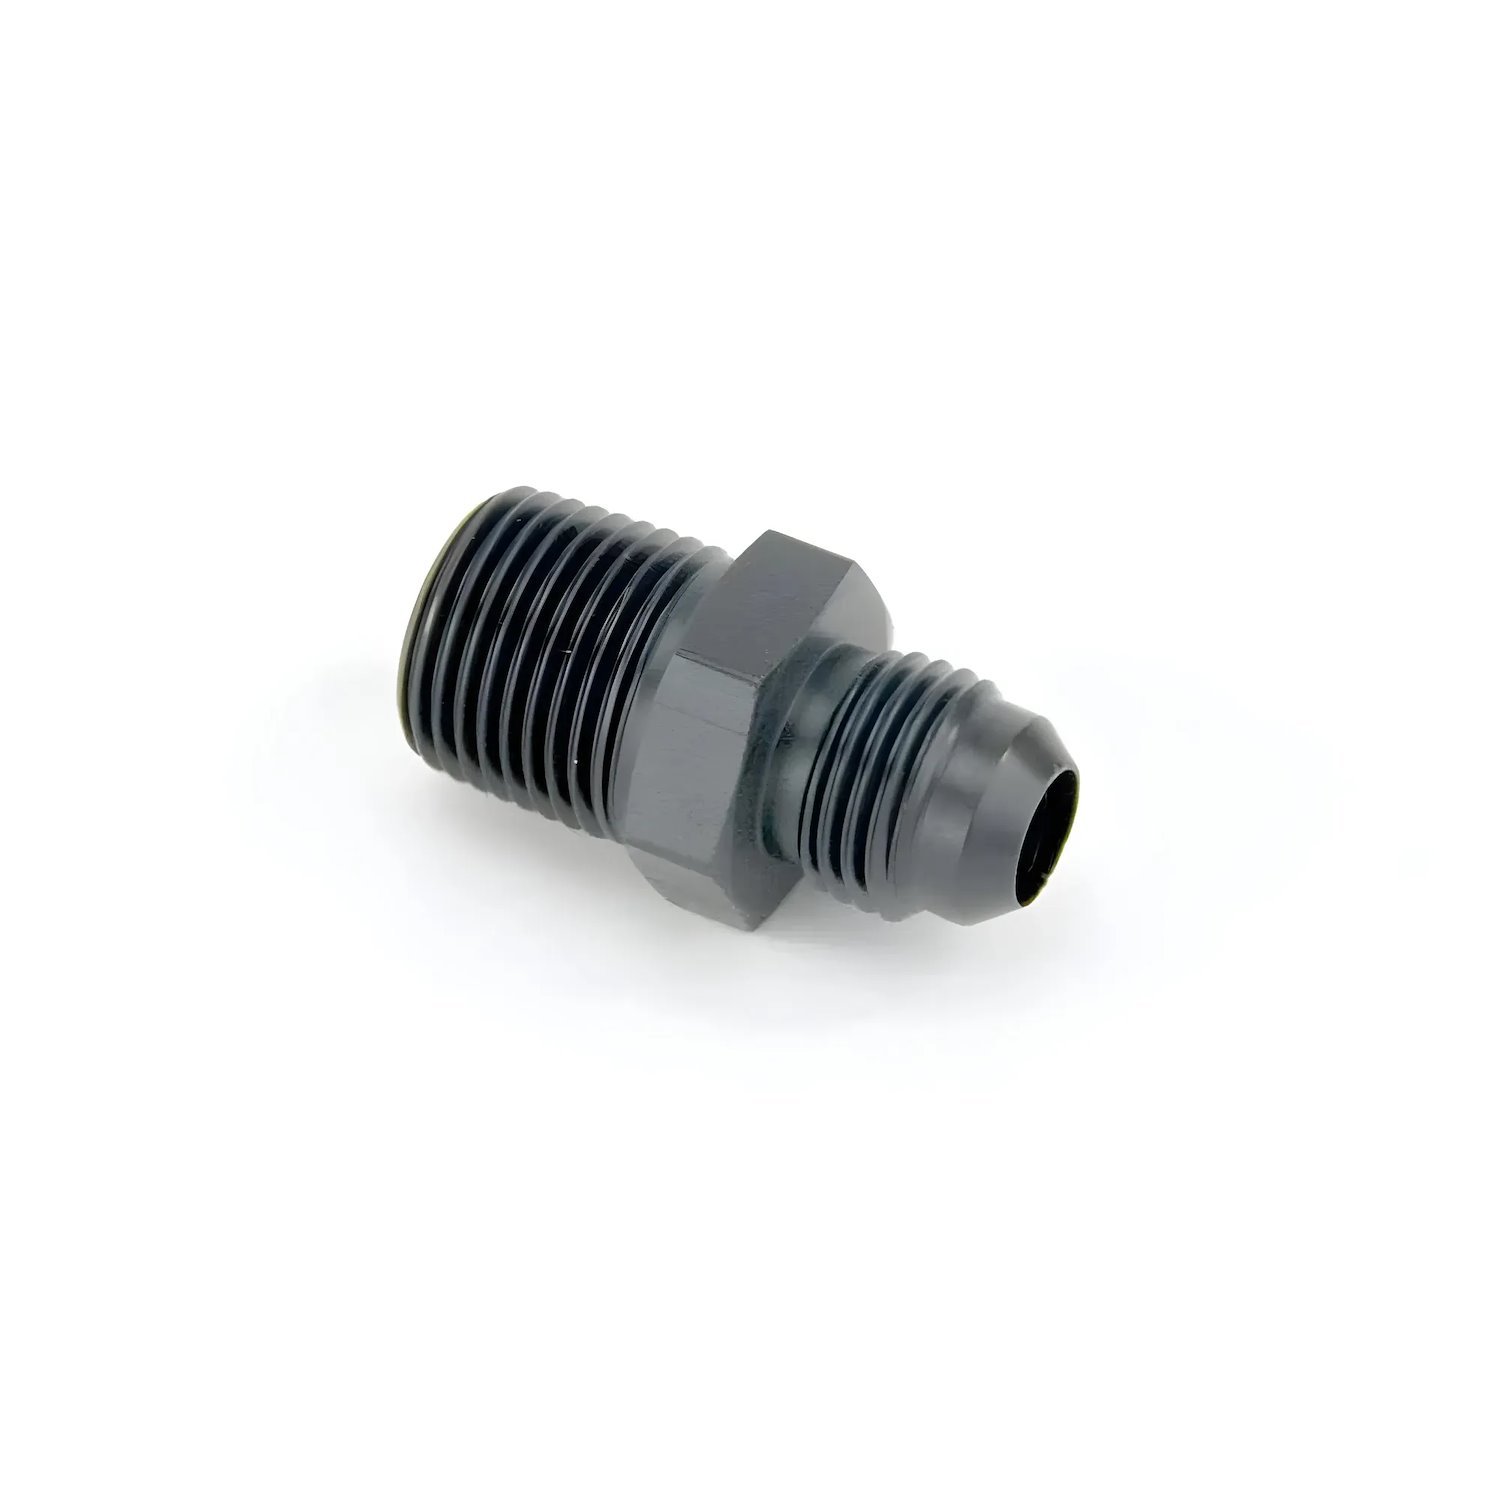 00-01159 3/8 in. NPT X 4AN Straight Fitting- Male/Male, Black